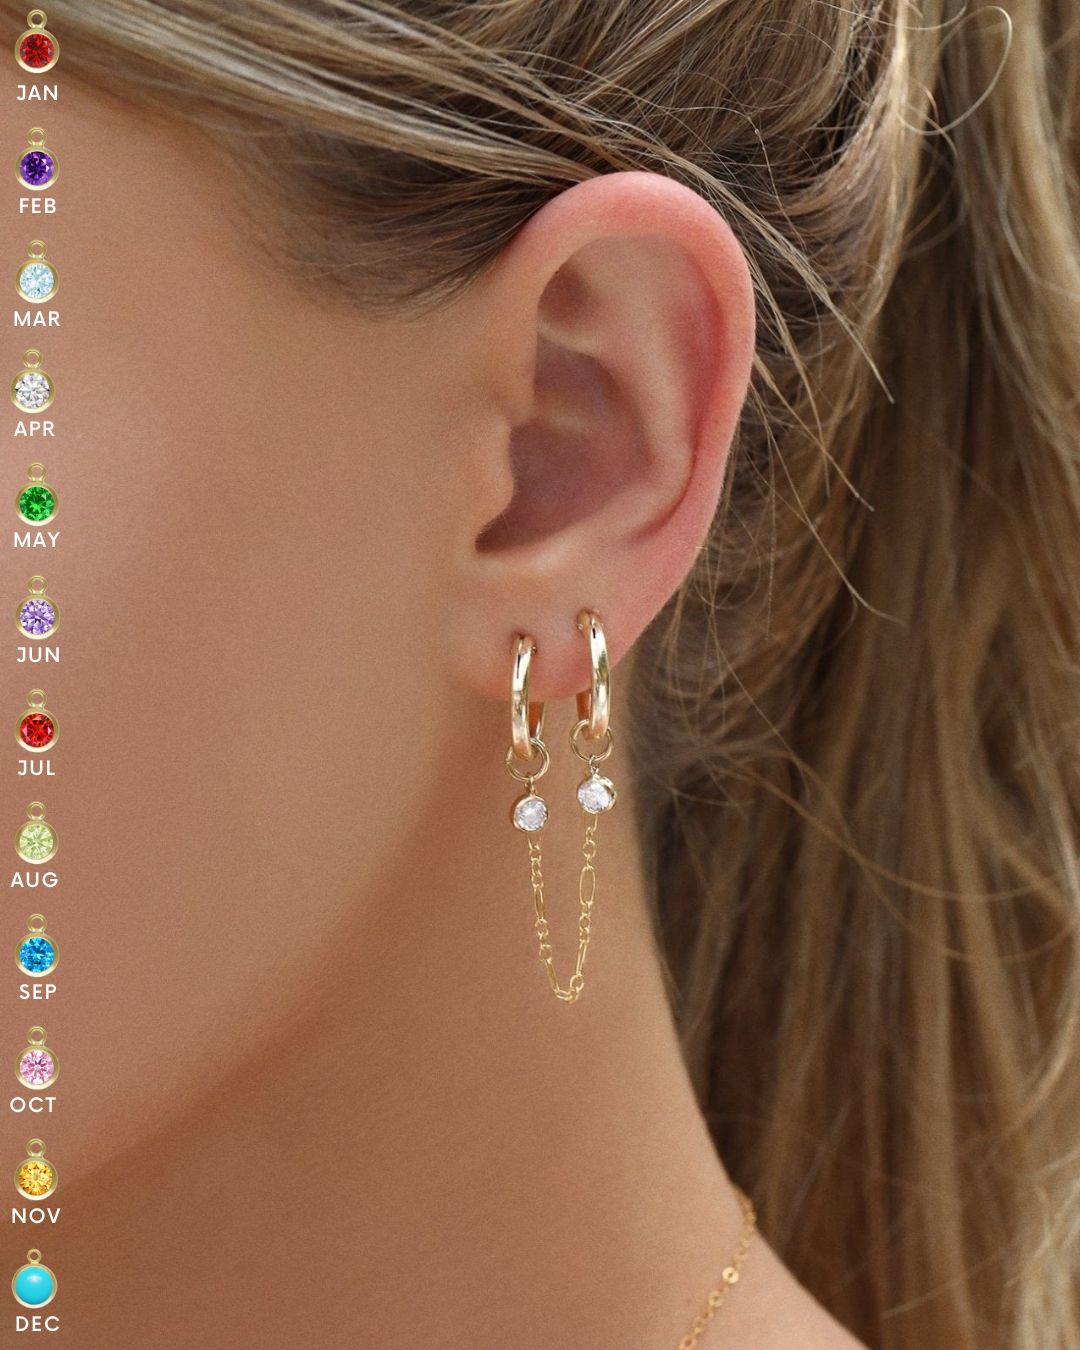 Double Piercing Birthstone Thick Hoop Earrings  - 14k Yellow Gold Fill